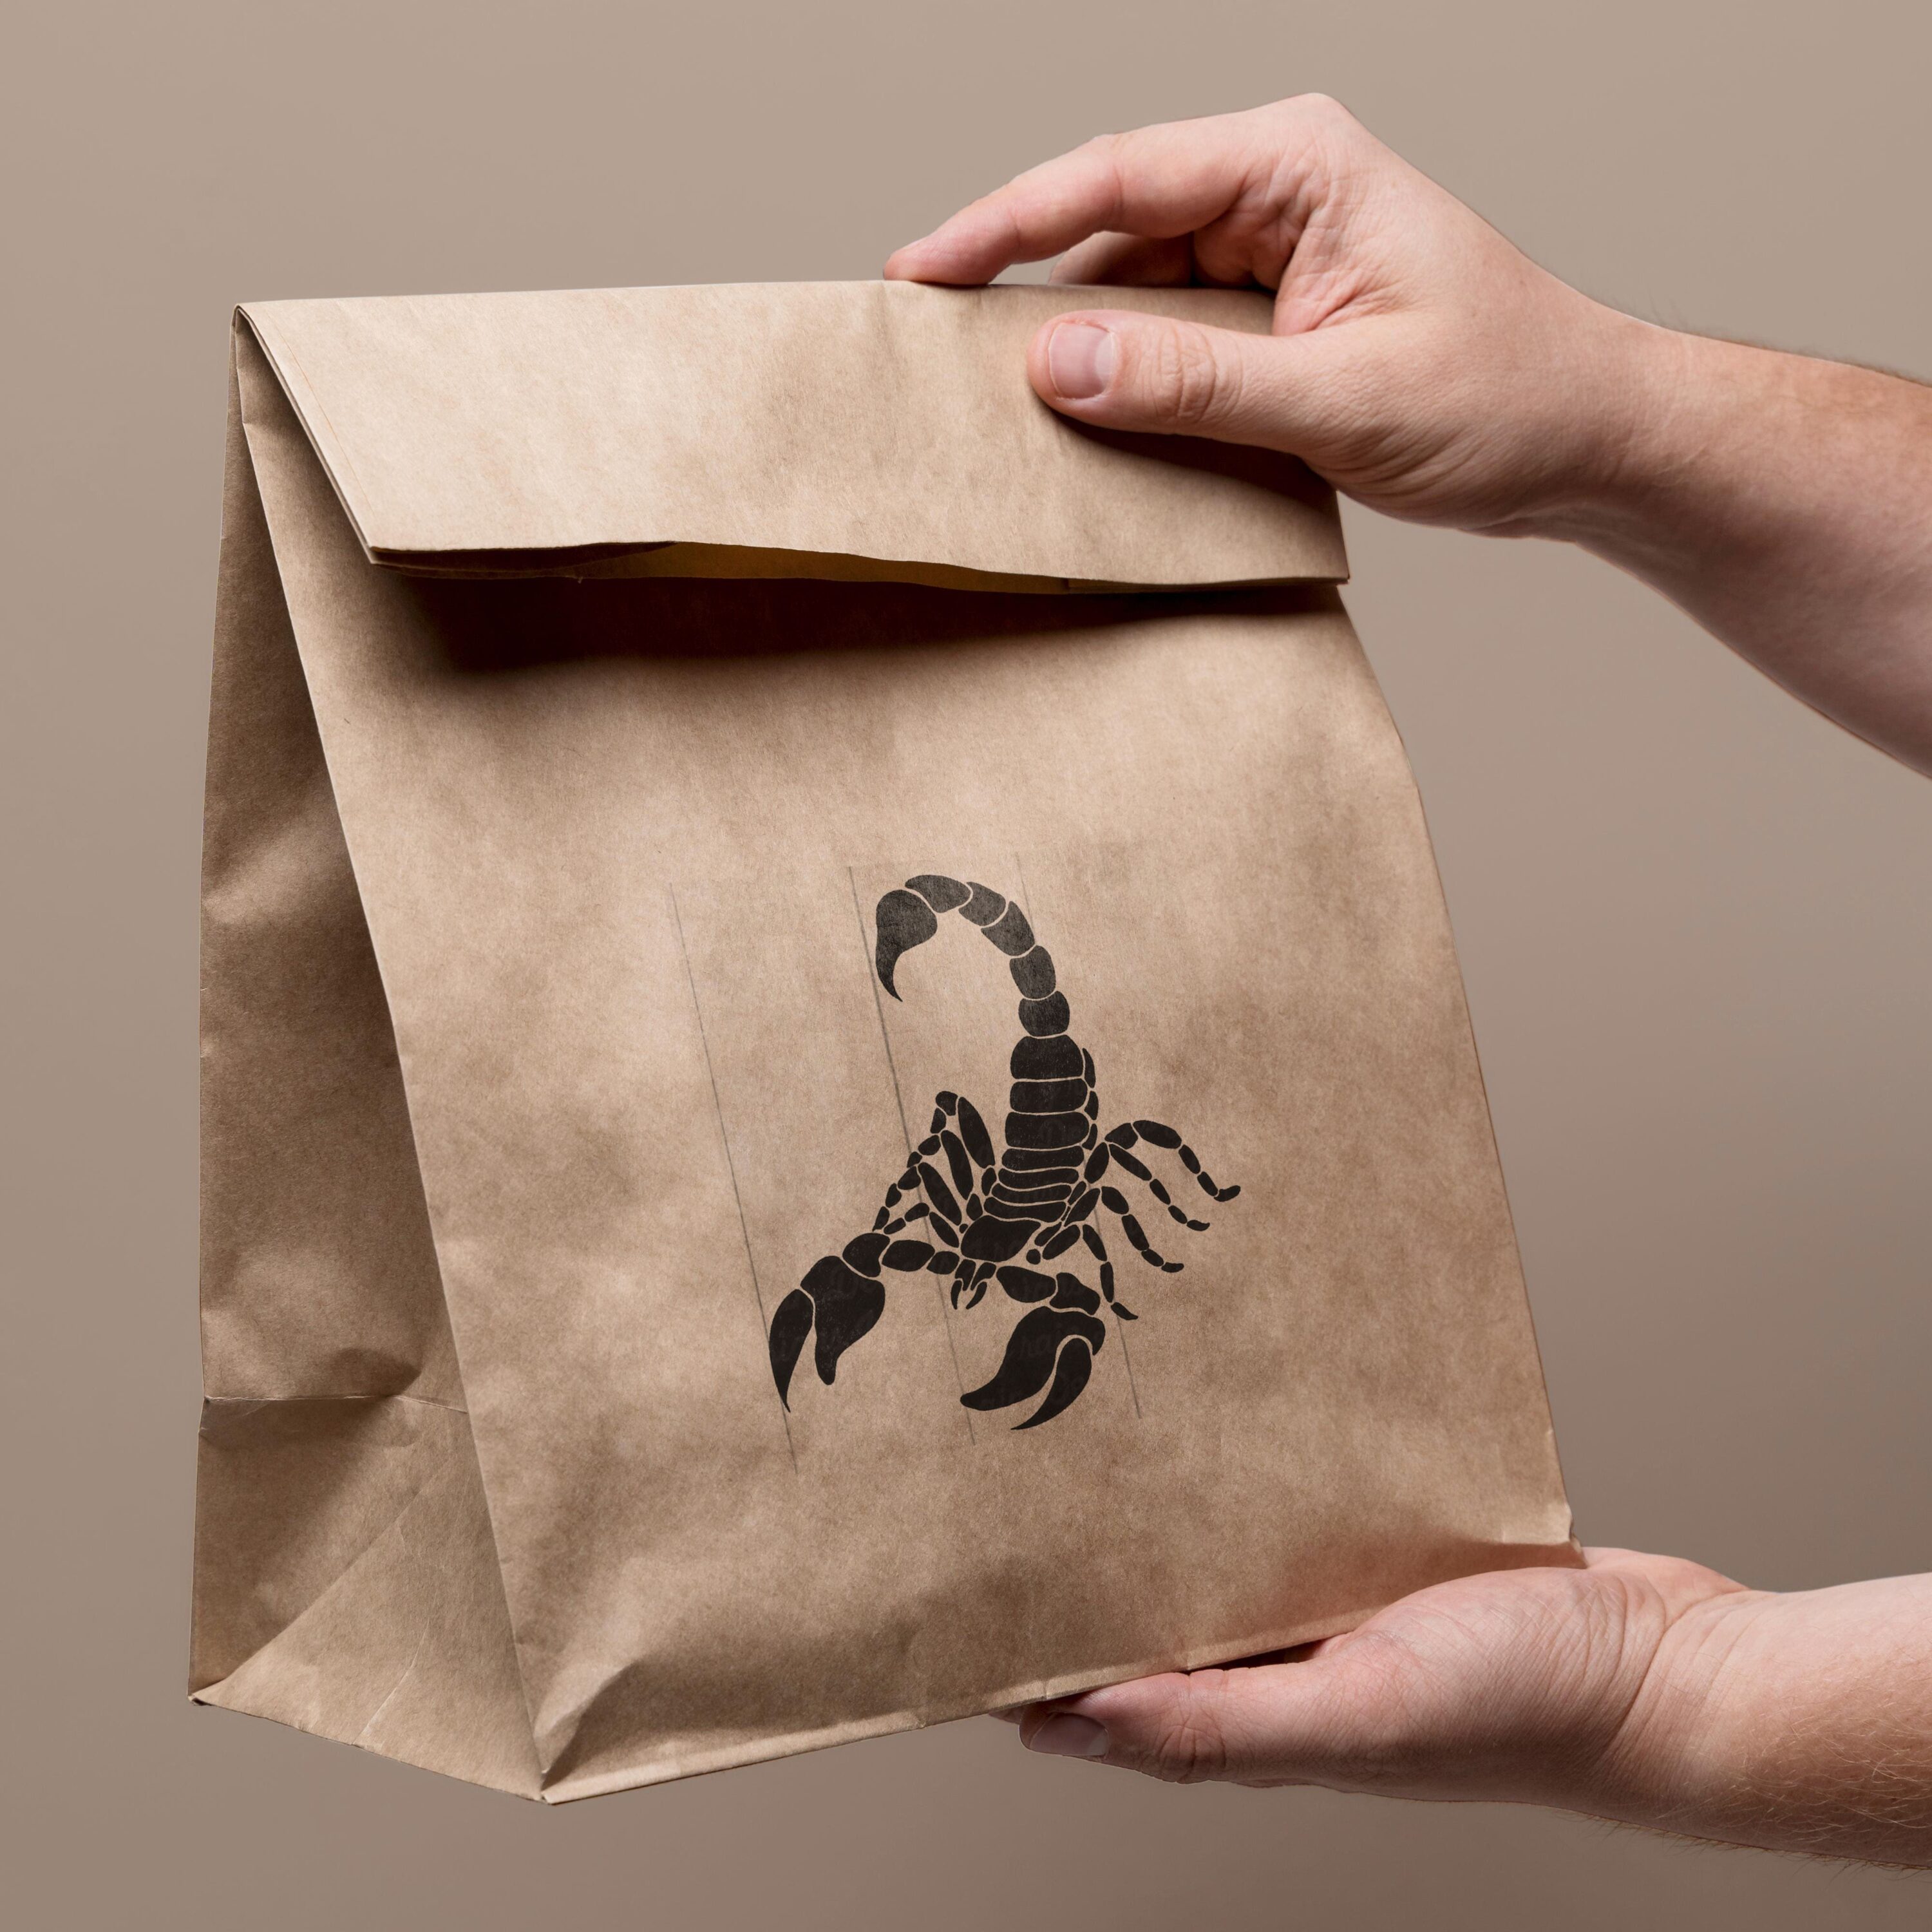 Hand holding a brown paper bag with a scorpion on it.